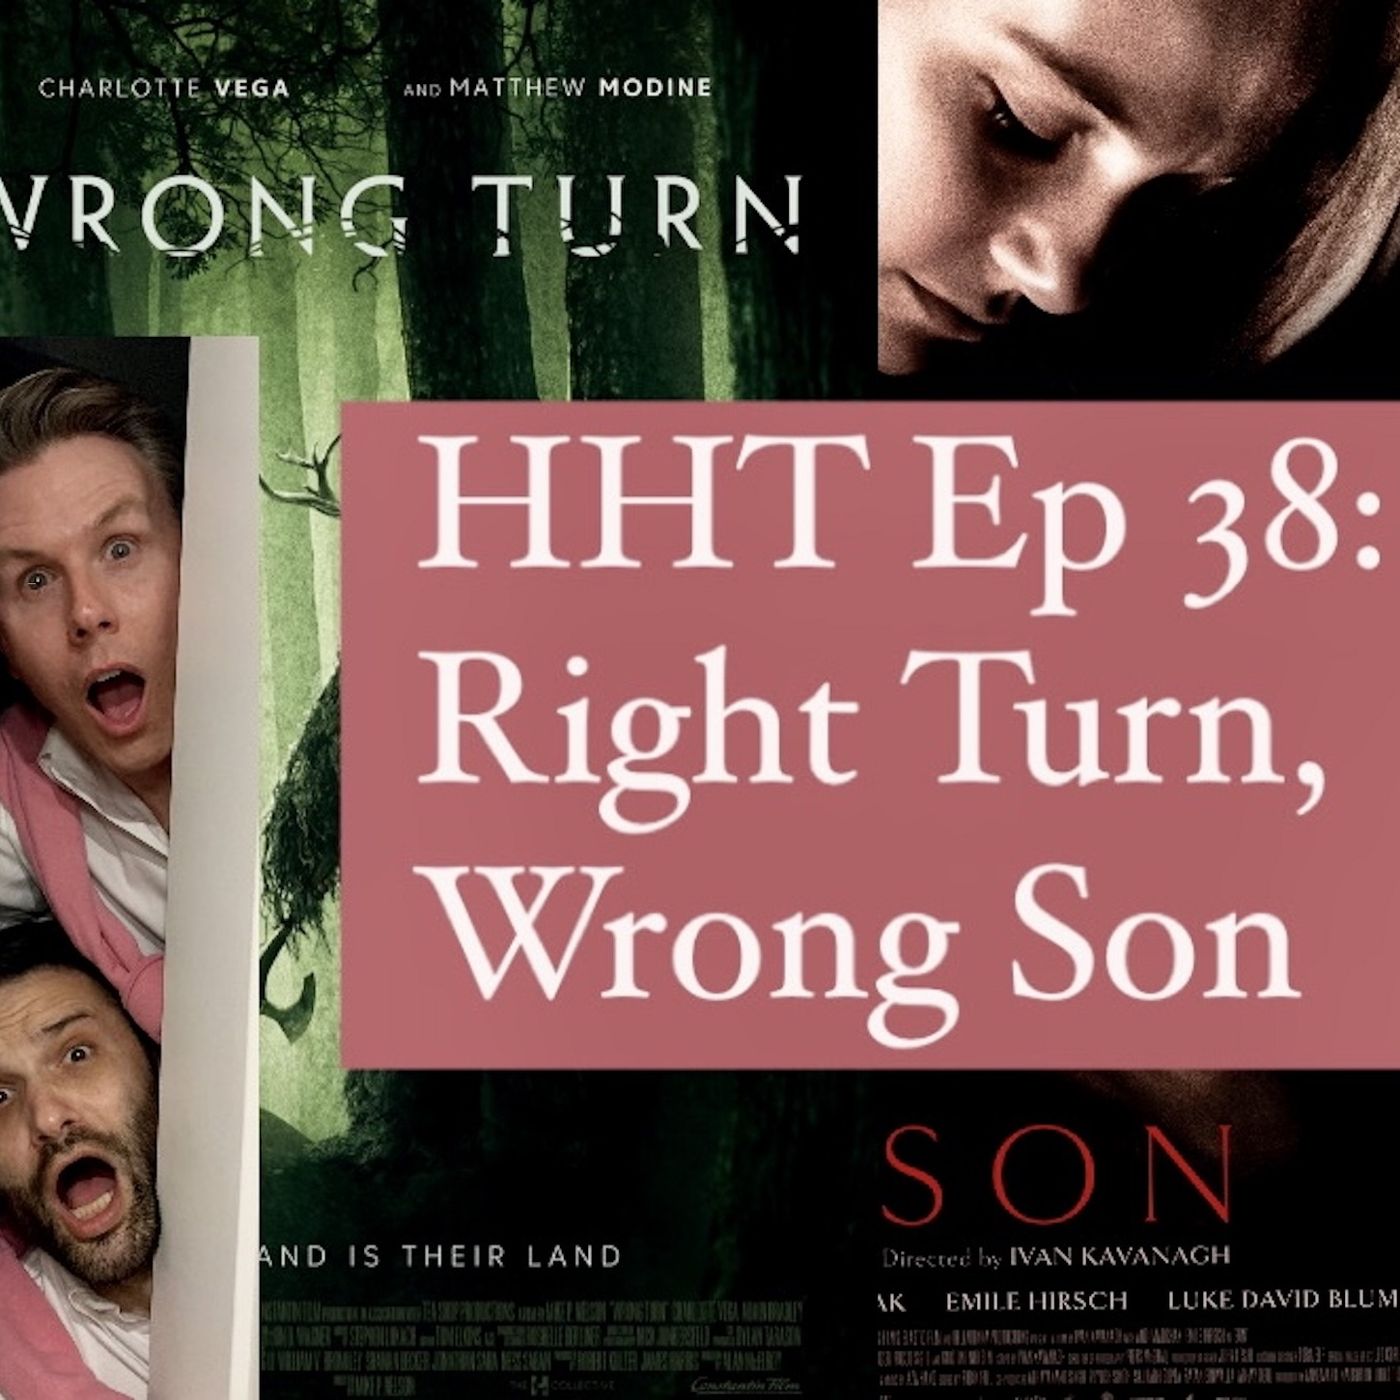 Ep 38: Right Turn, Wrong Son